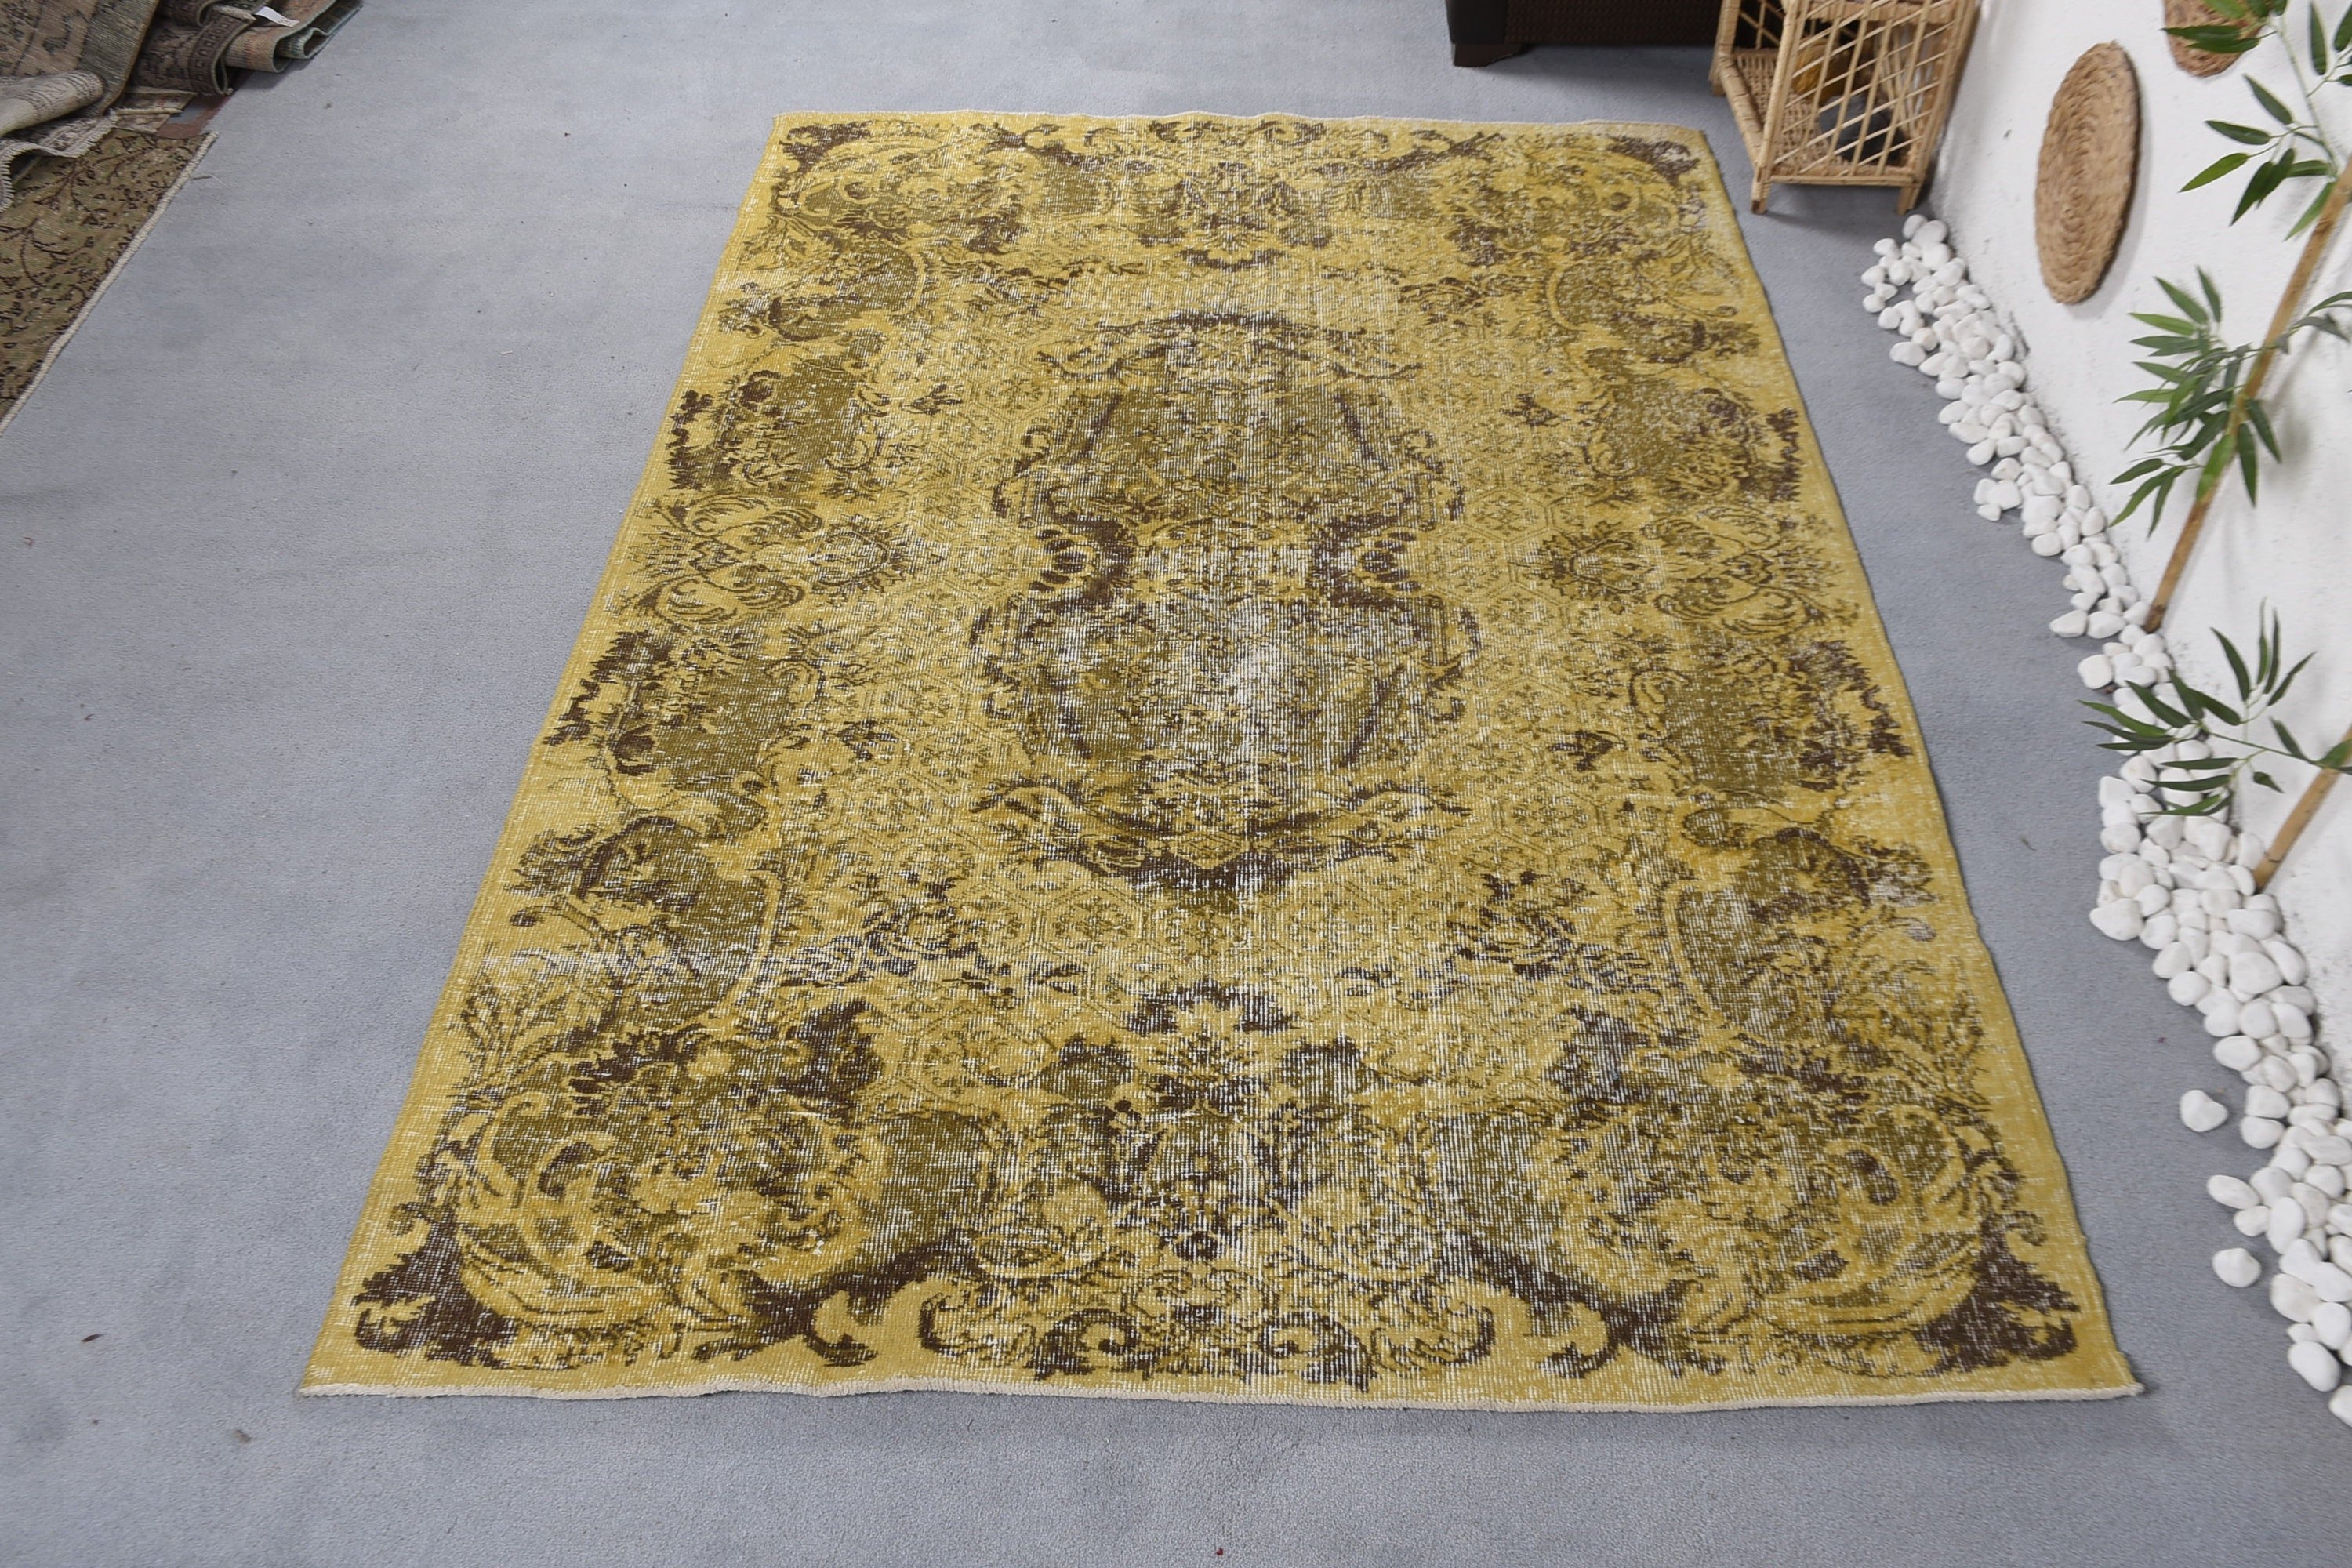 Yellow Kitchen Rug, Dining Room Rugs, Anatolian Rugs, Living Room Rugs, 5.8x8.6 ft Large Rug, Turkish Rug, Vintage Rugs